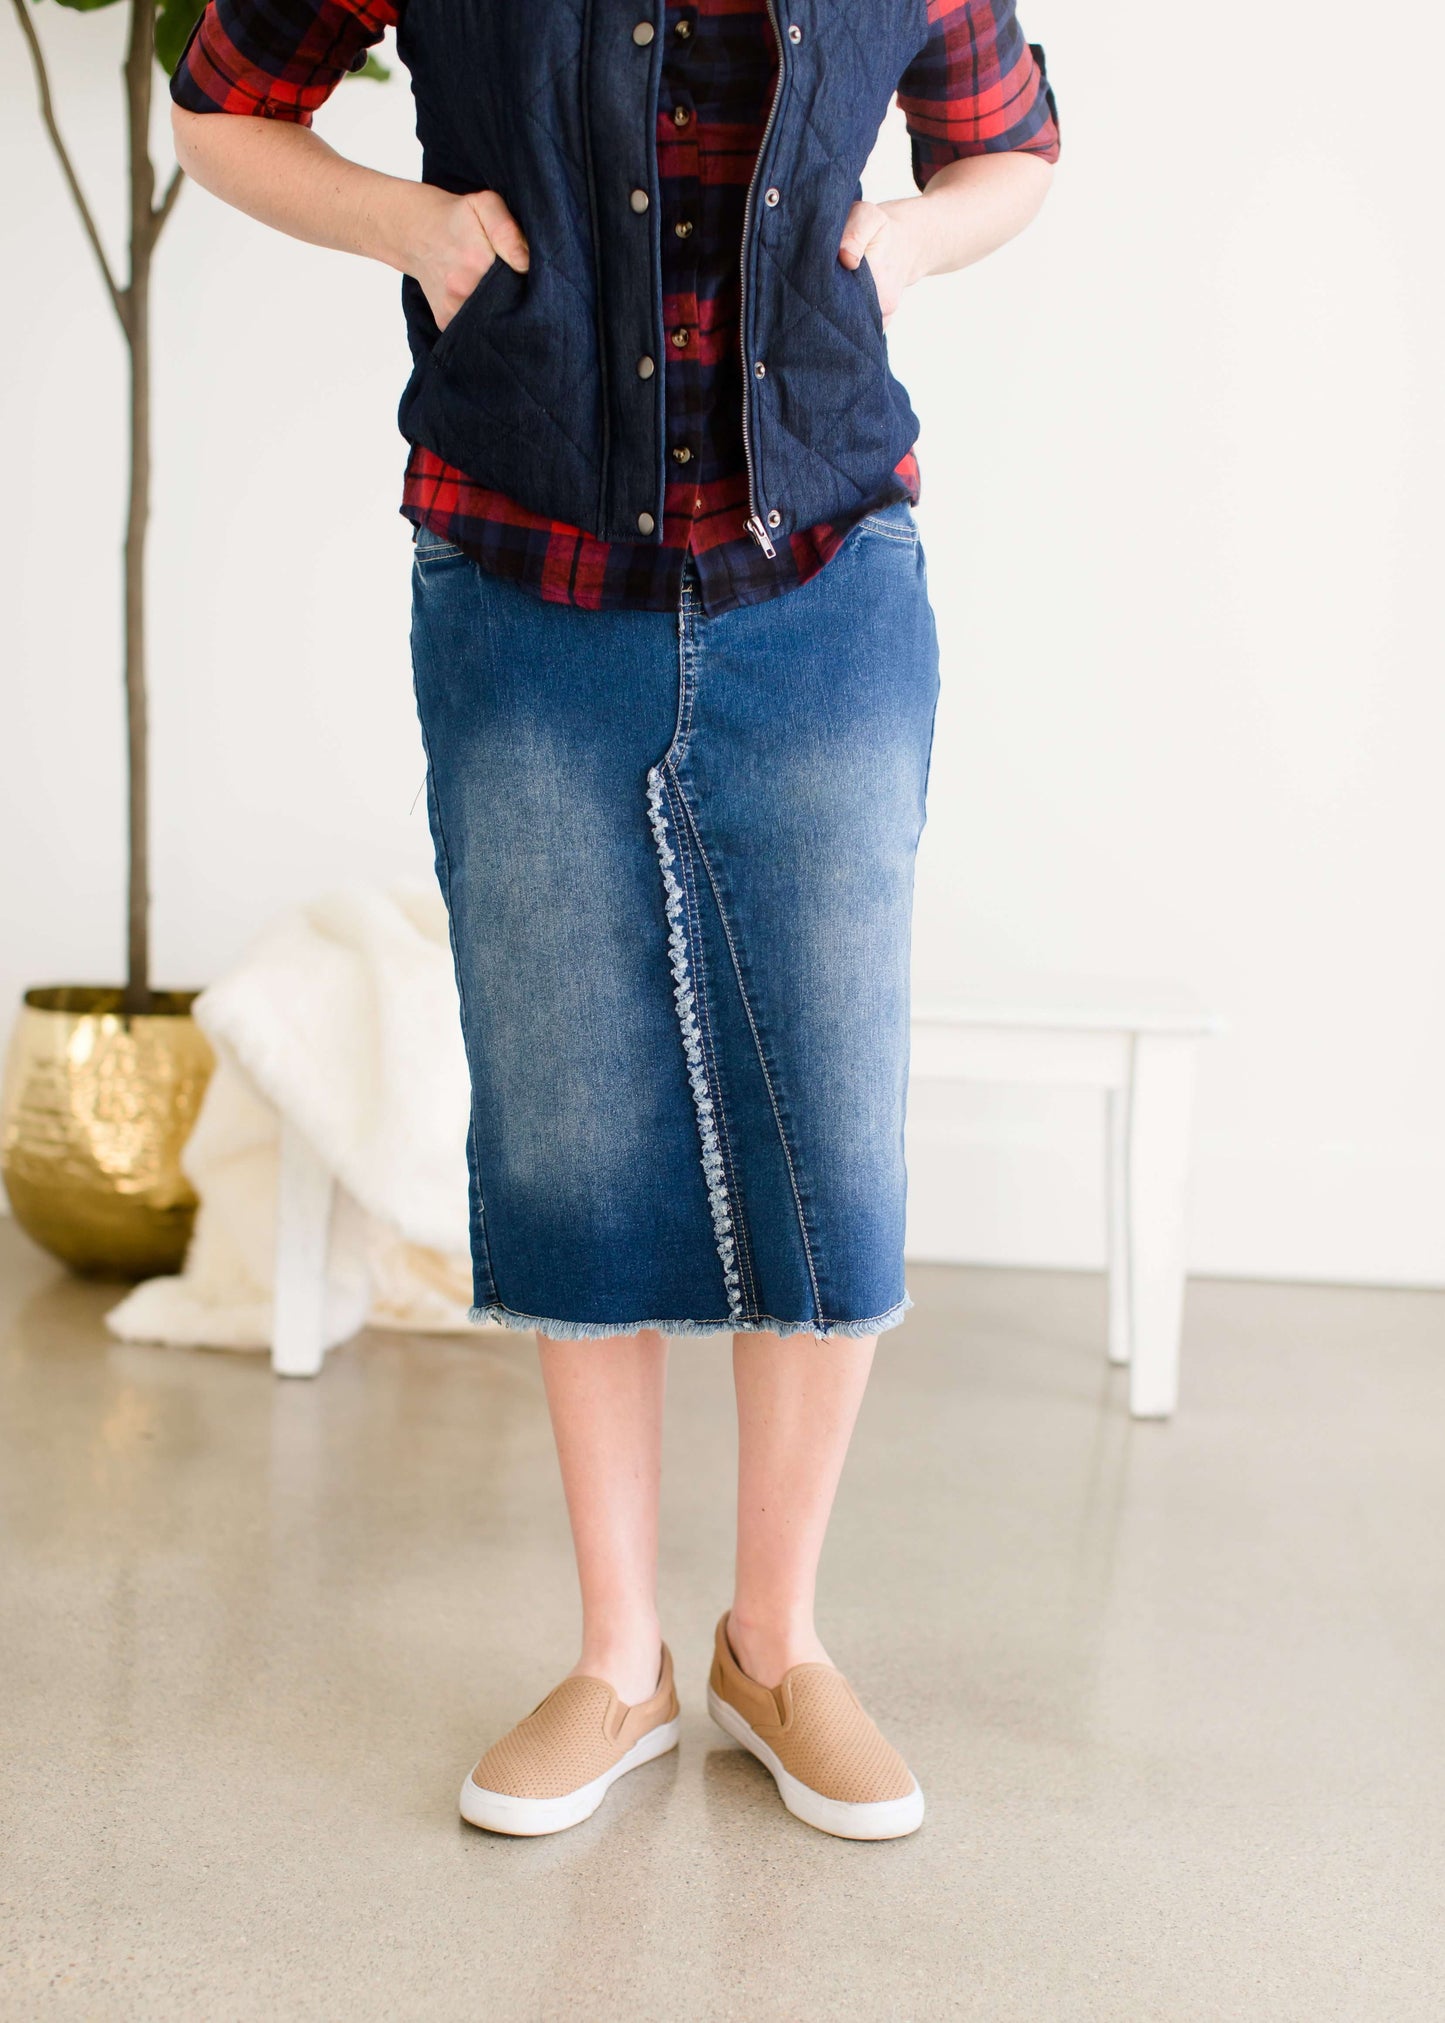 Fringe front below the knee jean skirt with vintage fading and a raw hem.